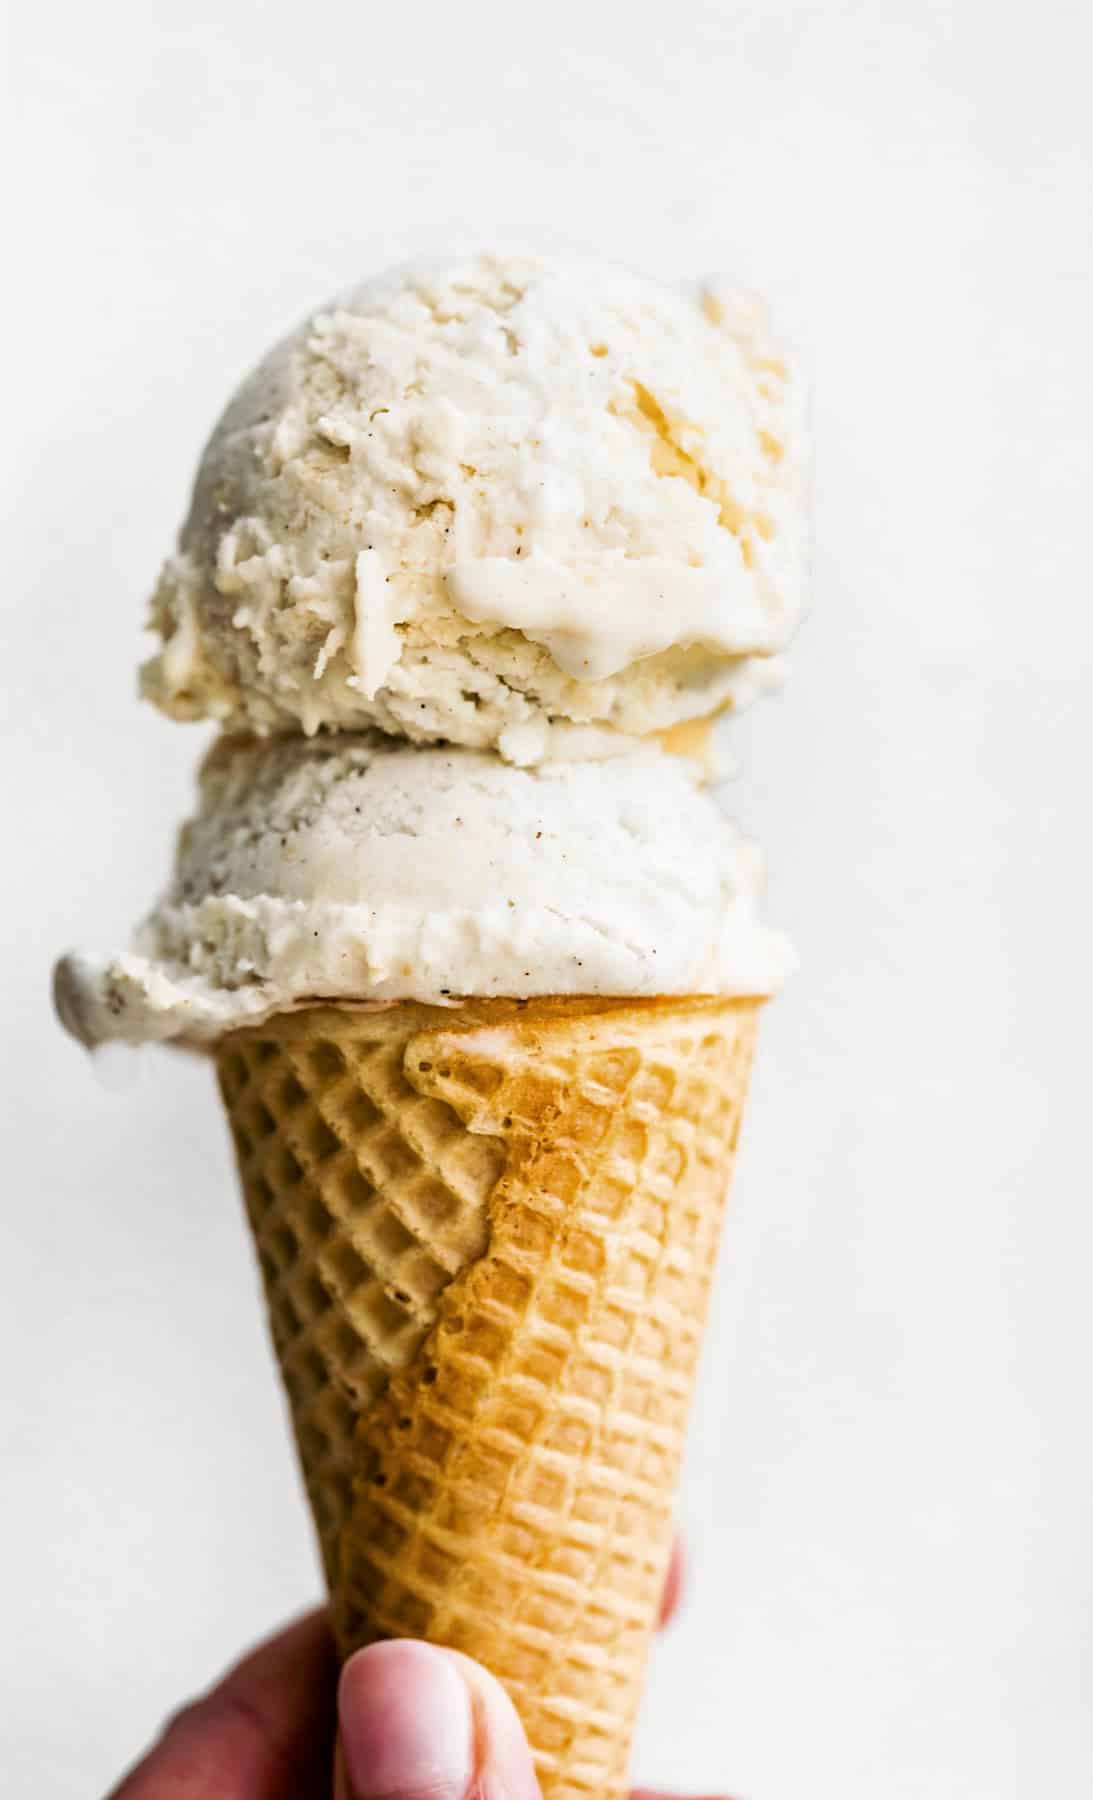 Vegan ice cream on top of a sugar cone against a white background.